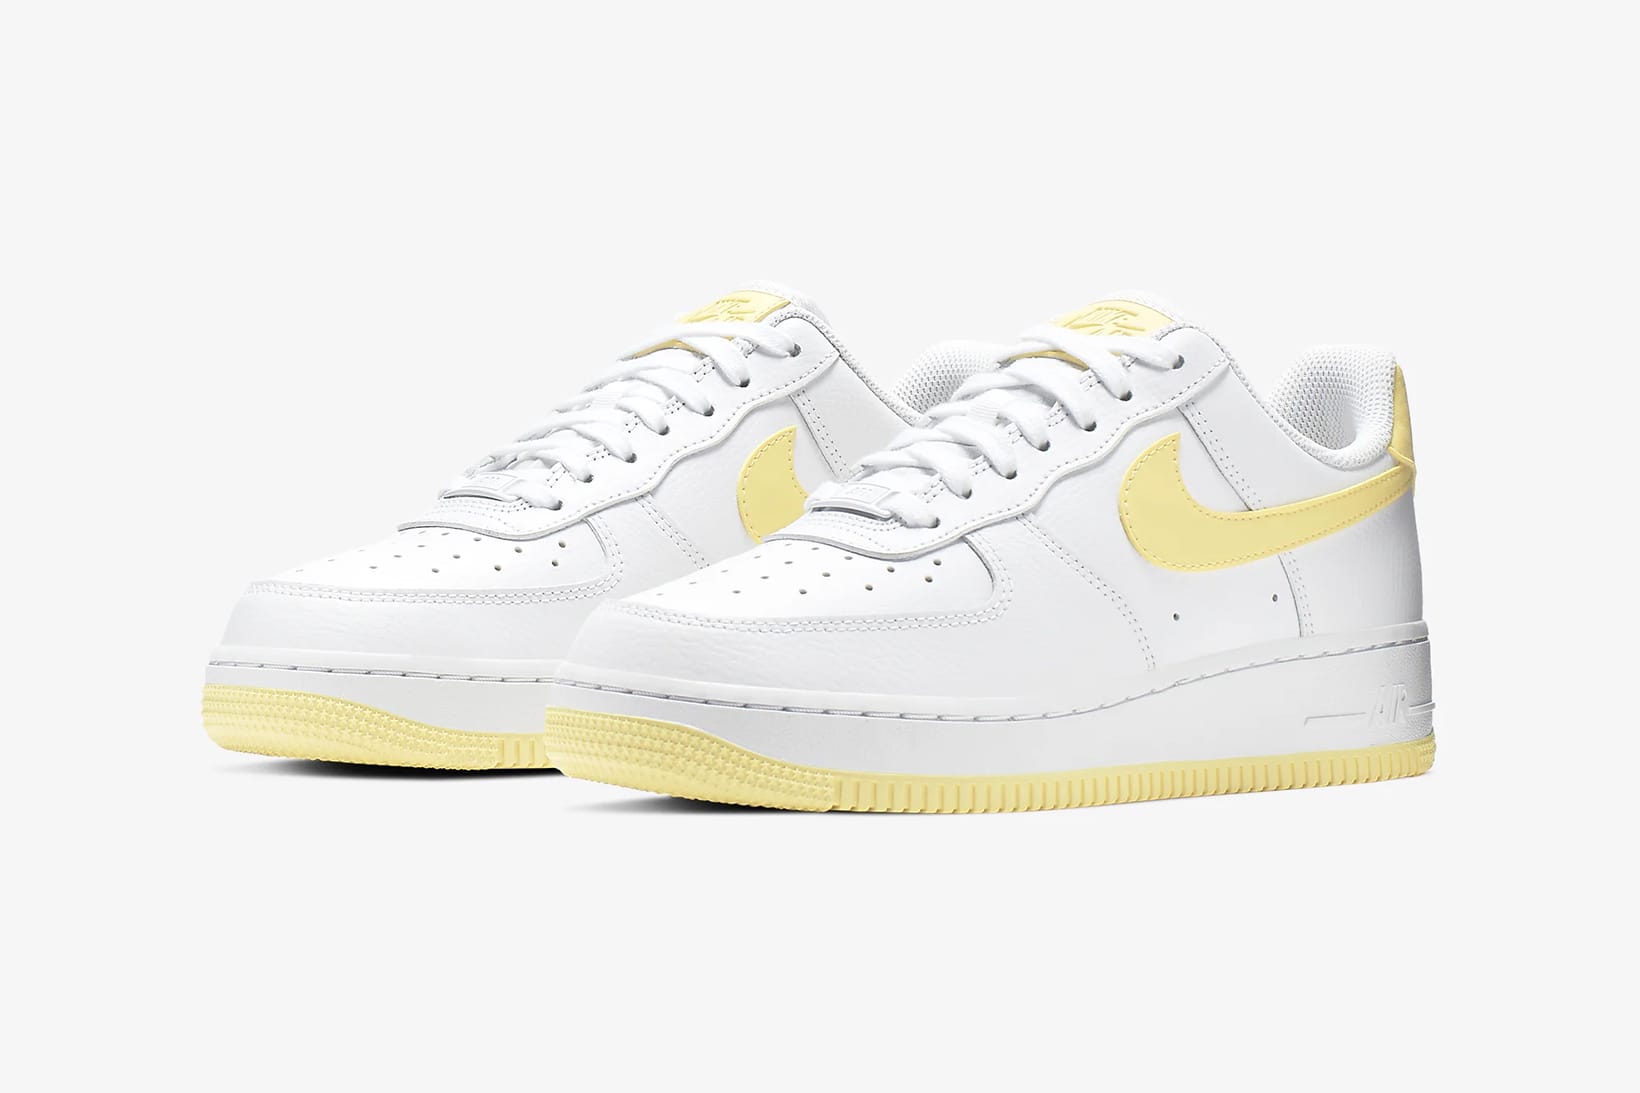 Nike's Air Force 1 '07 in Two New 